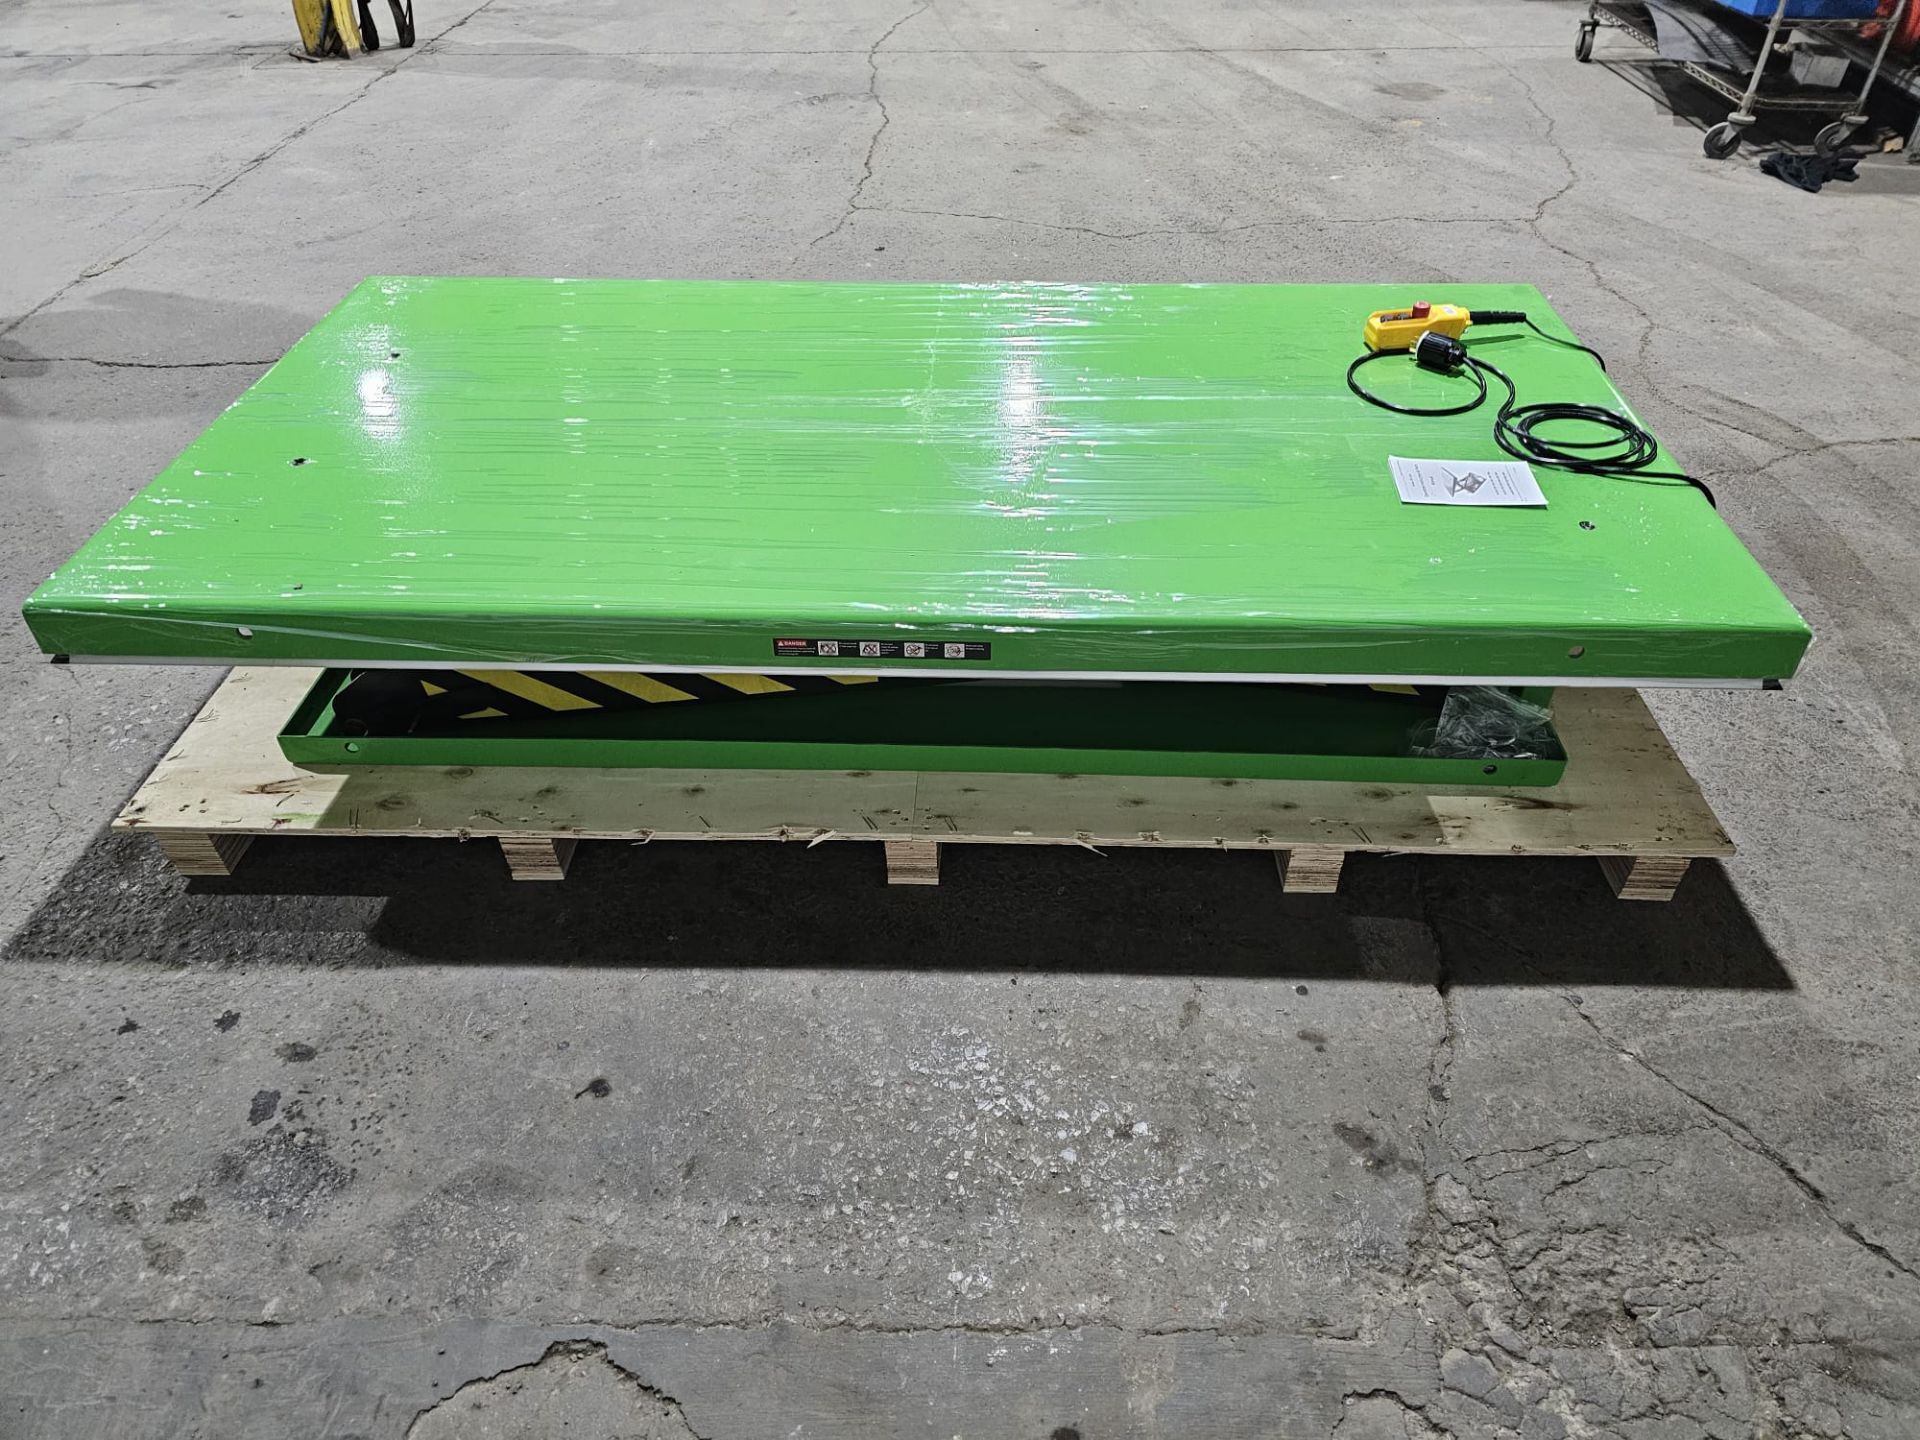 HW Hydraulic Lift Table 94" x 47" x 64" lift - 11,000lbs capacity - UNUSED and MINT - 220V - Image 2 of 4